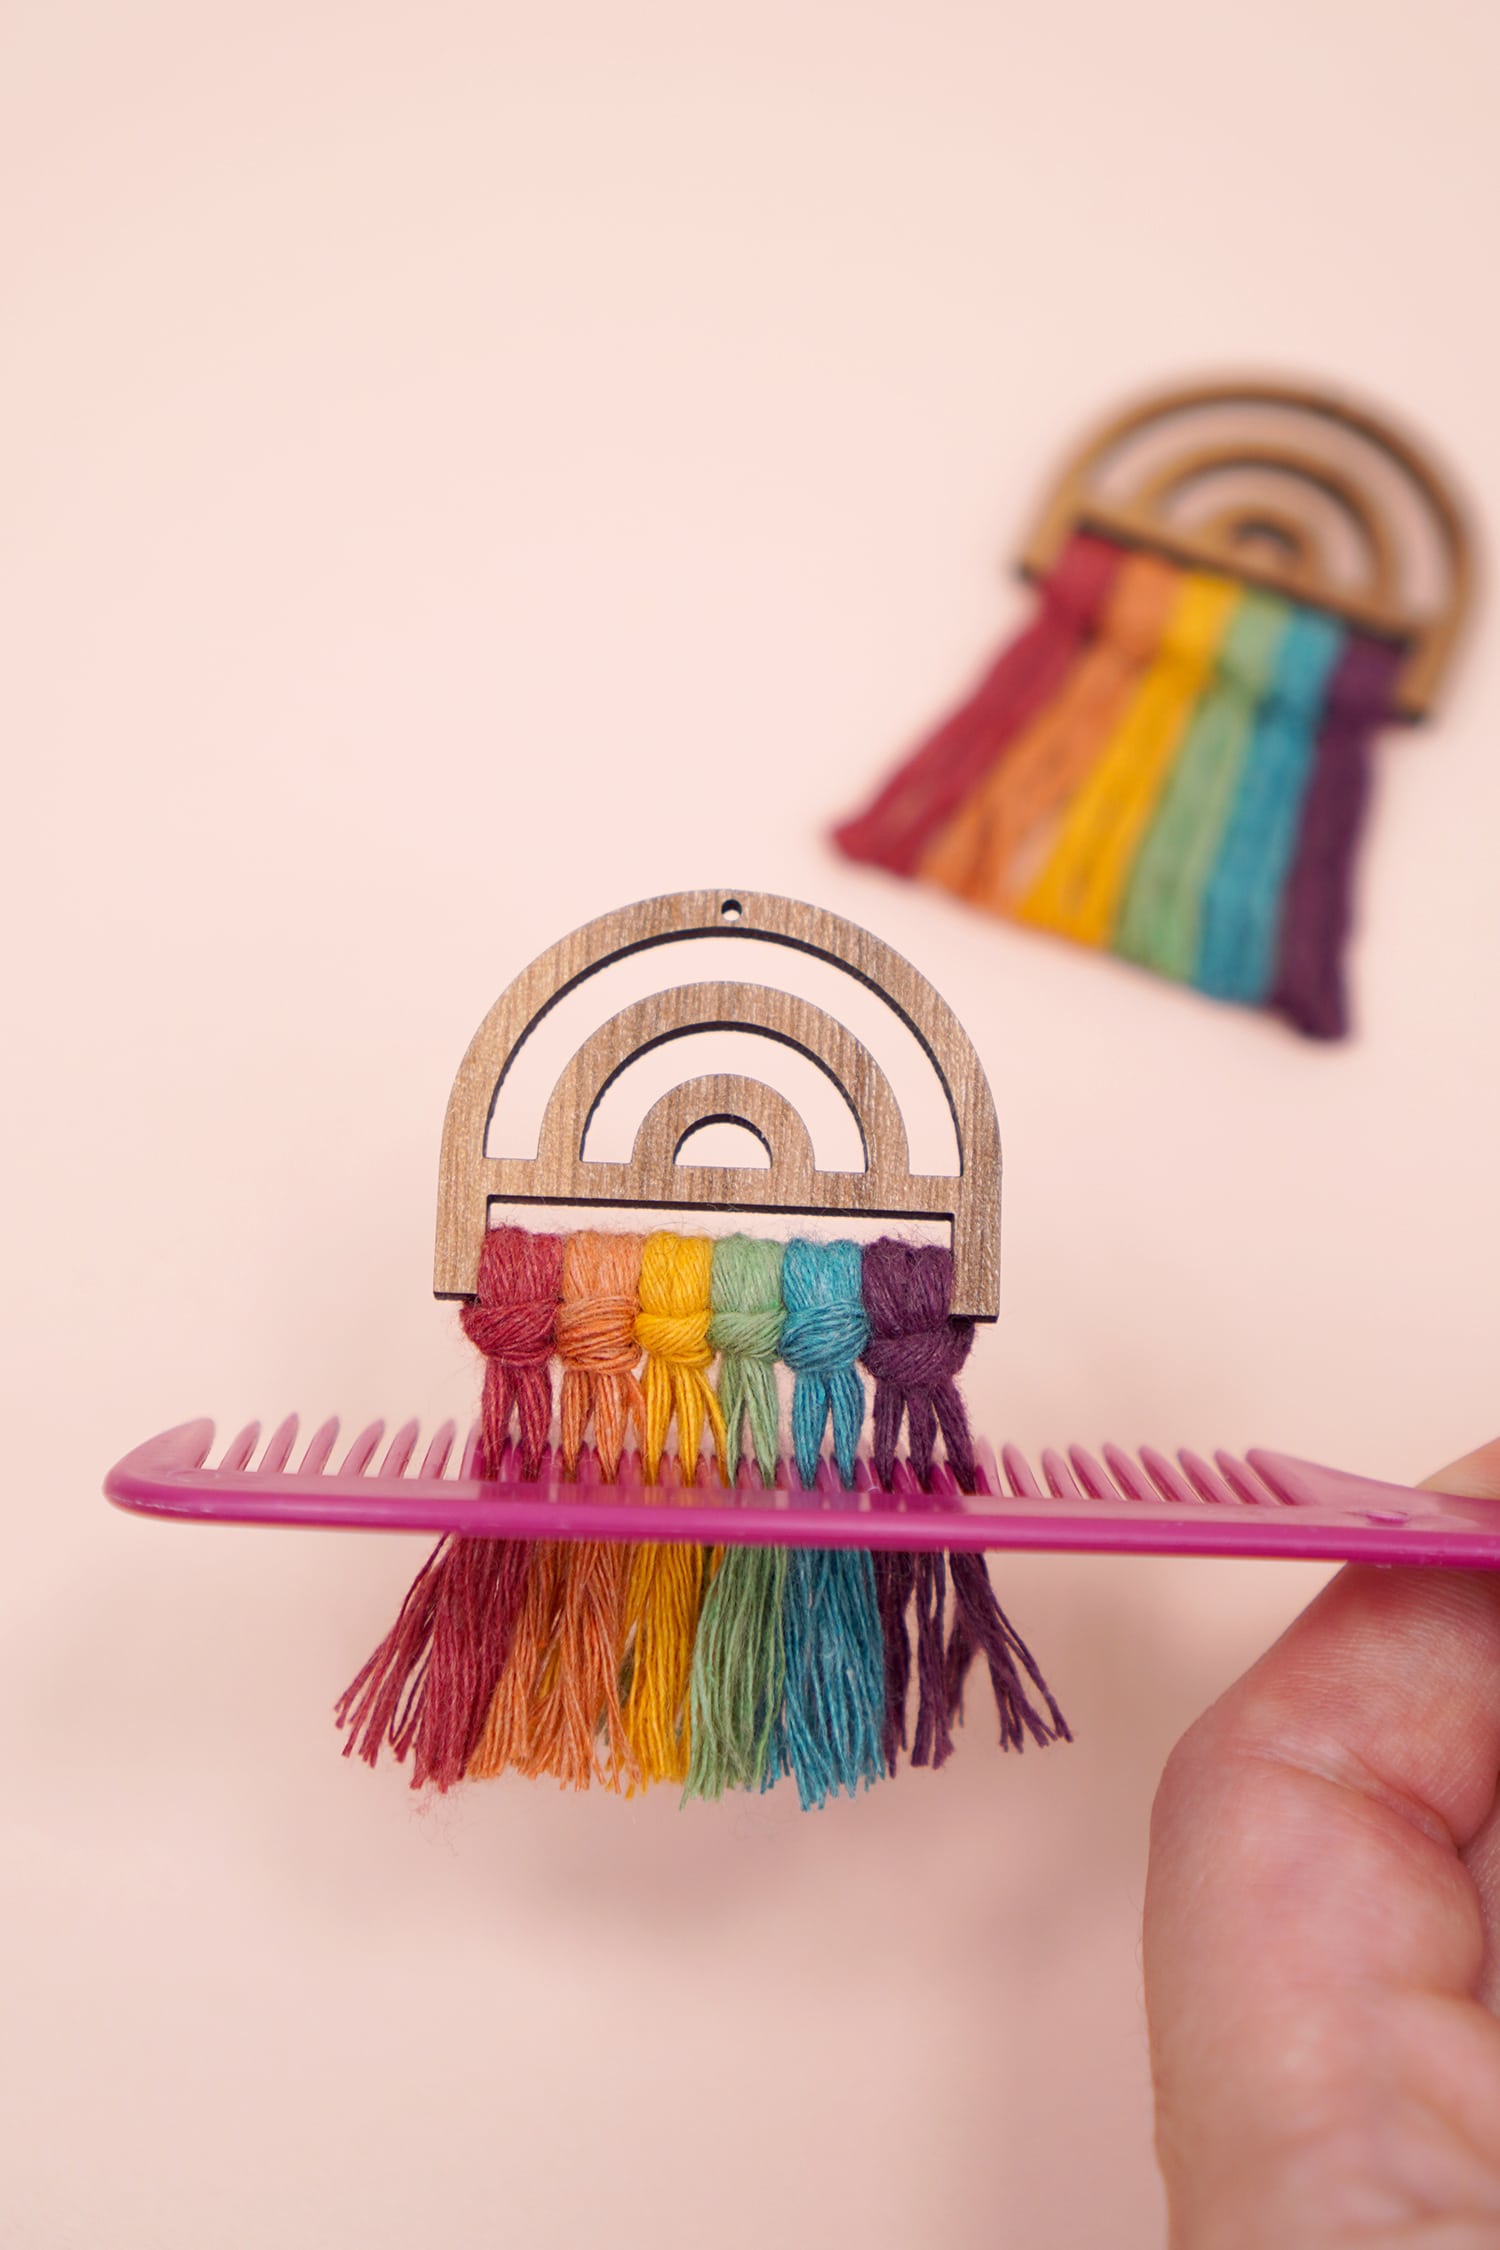 Combing a rainbow macrame earring with a pink comb on a peach background